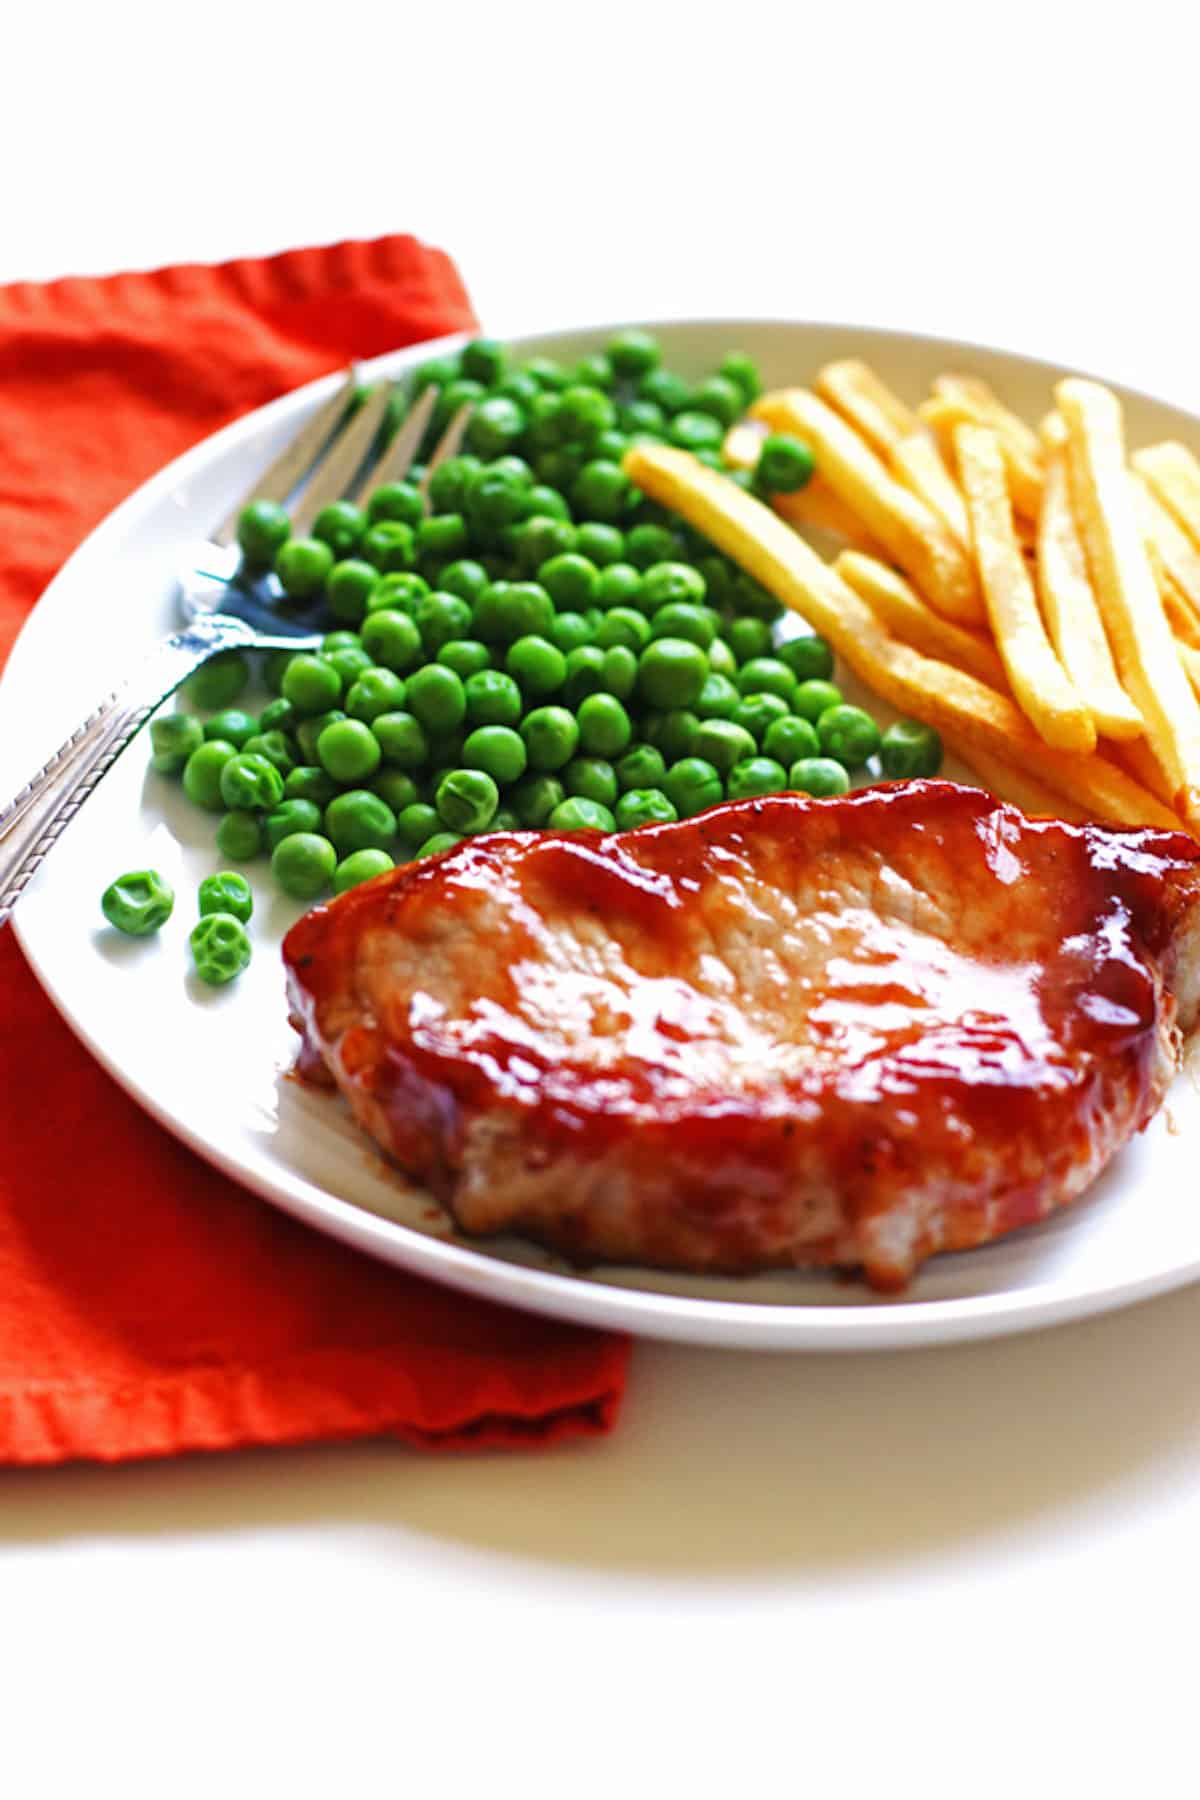 A white plate with a barbecue pork chop, peas, and french fries.